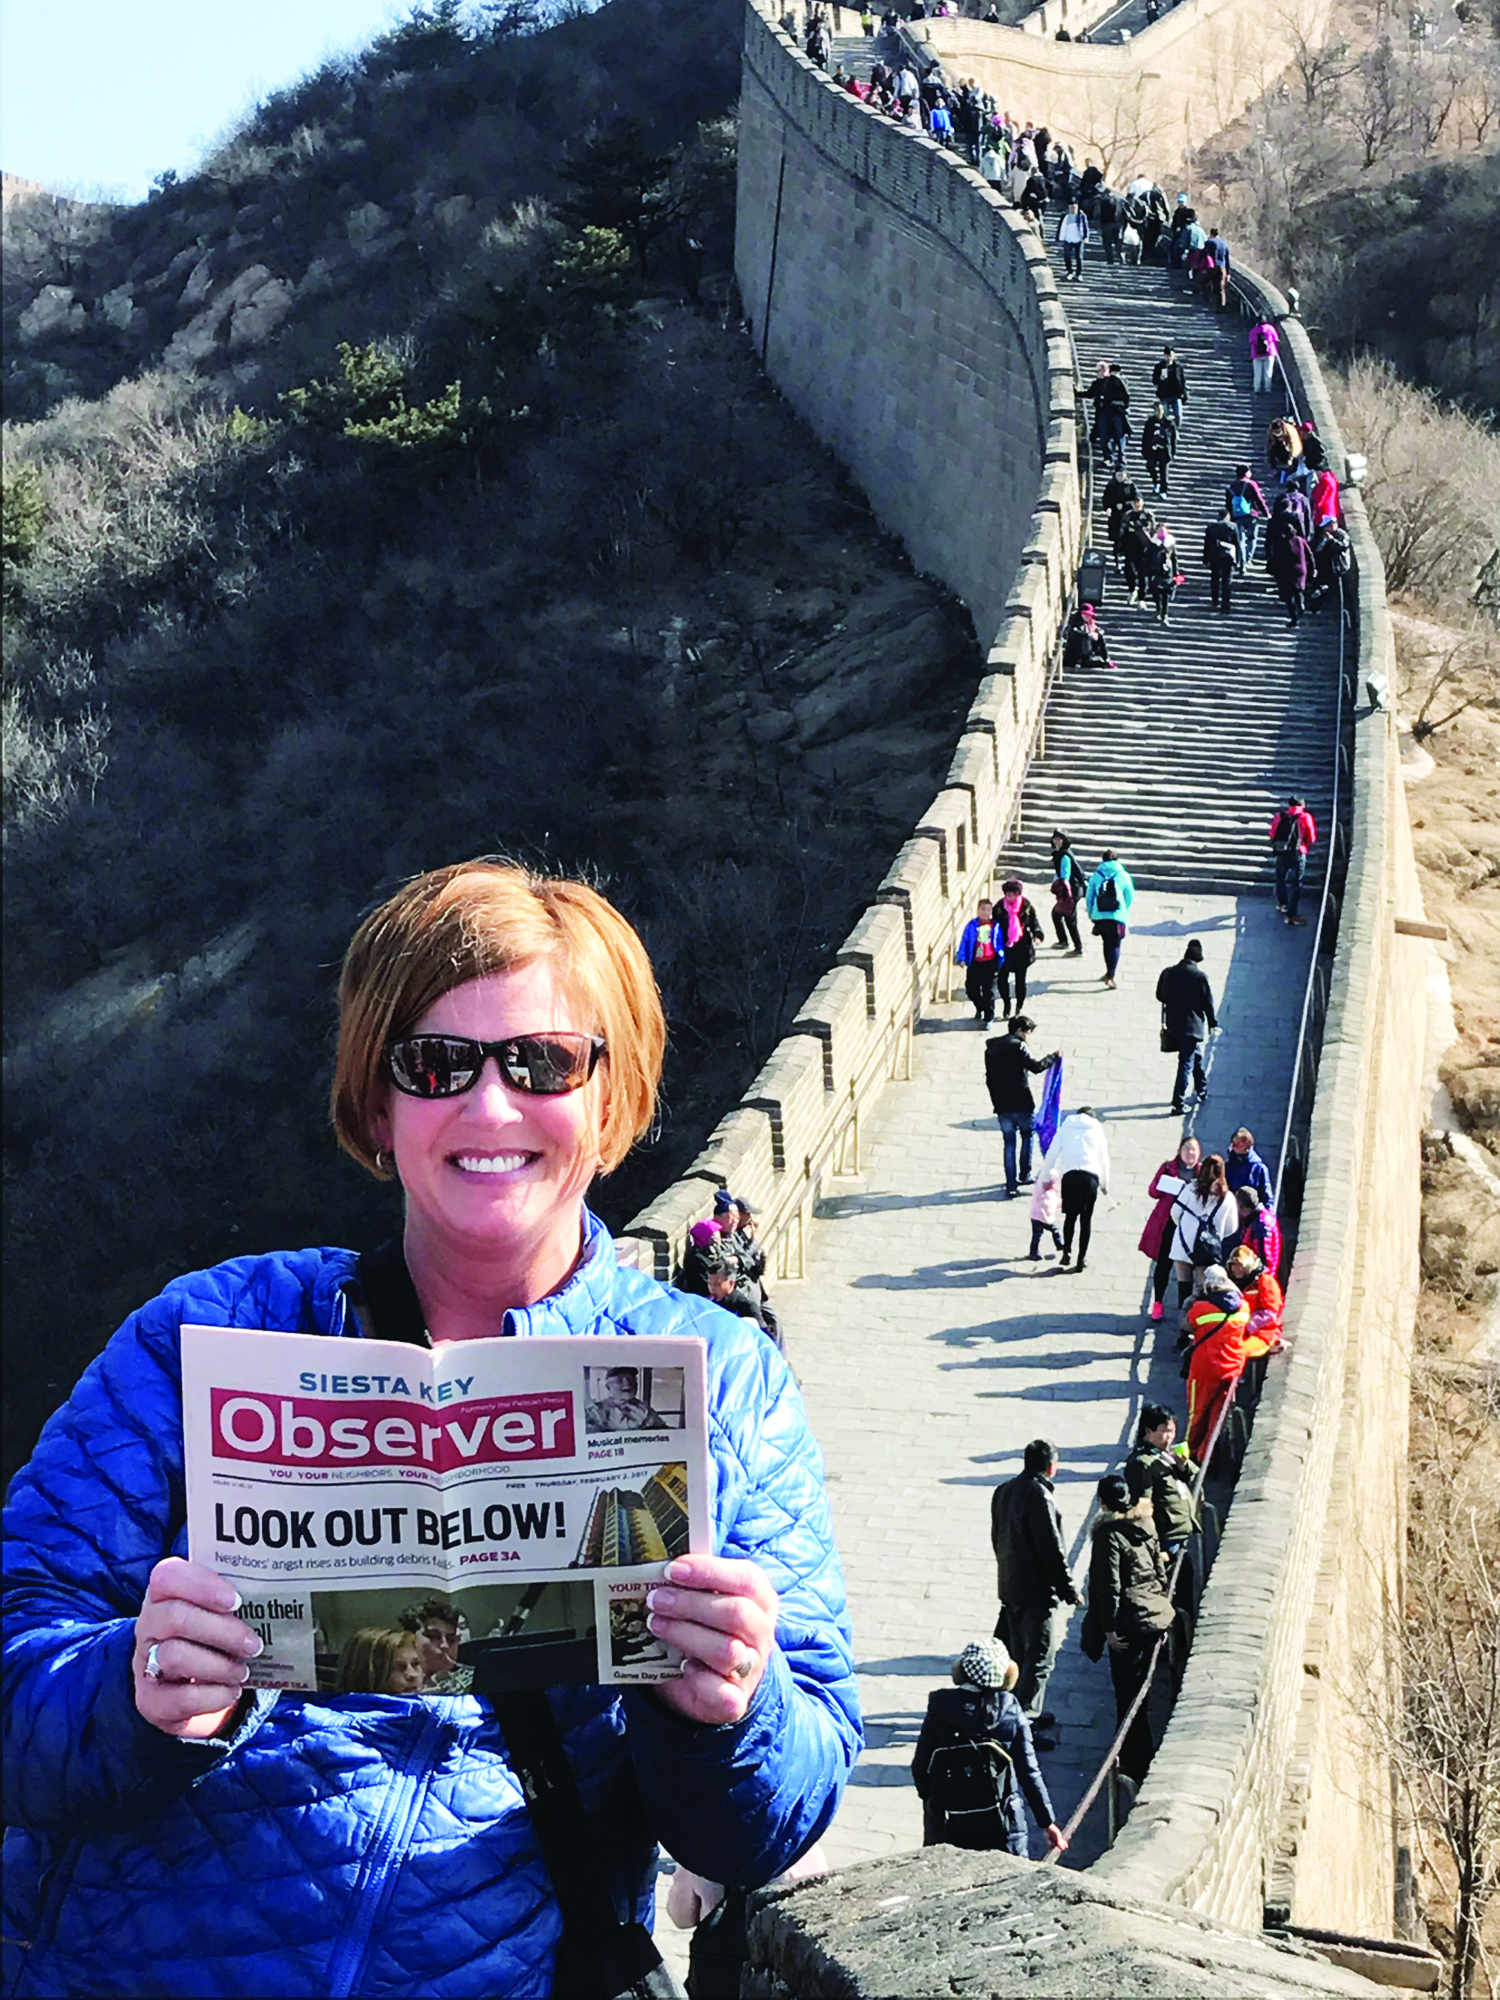 Amy Adornetto took her Siesta Key Observer to the Great Wall of China.